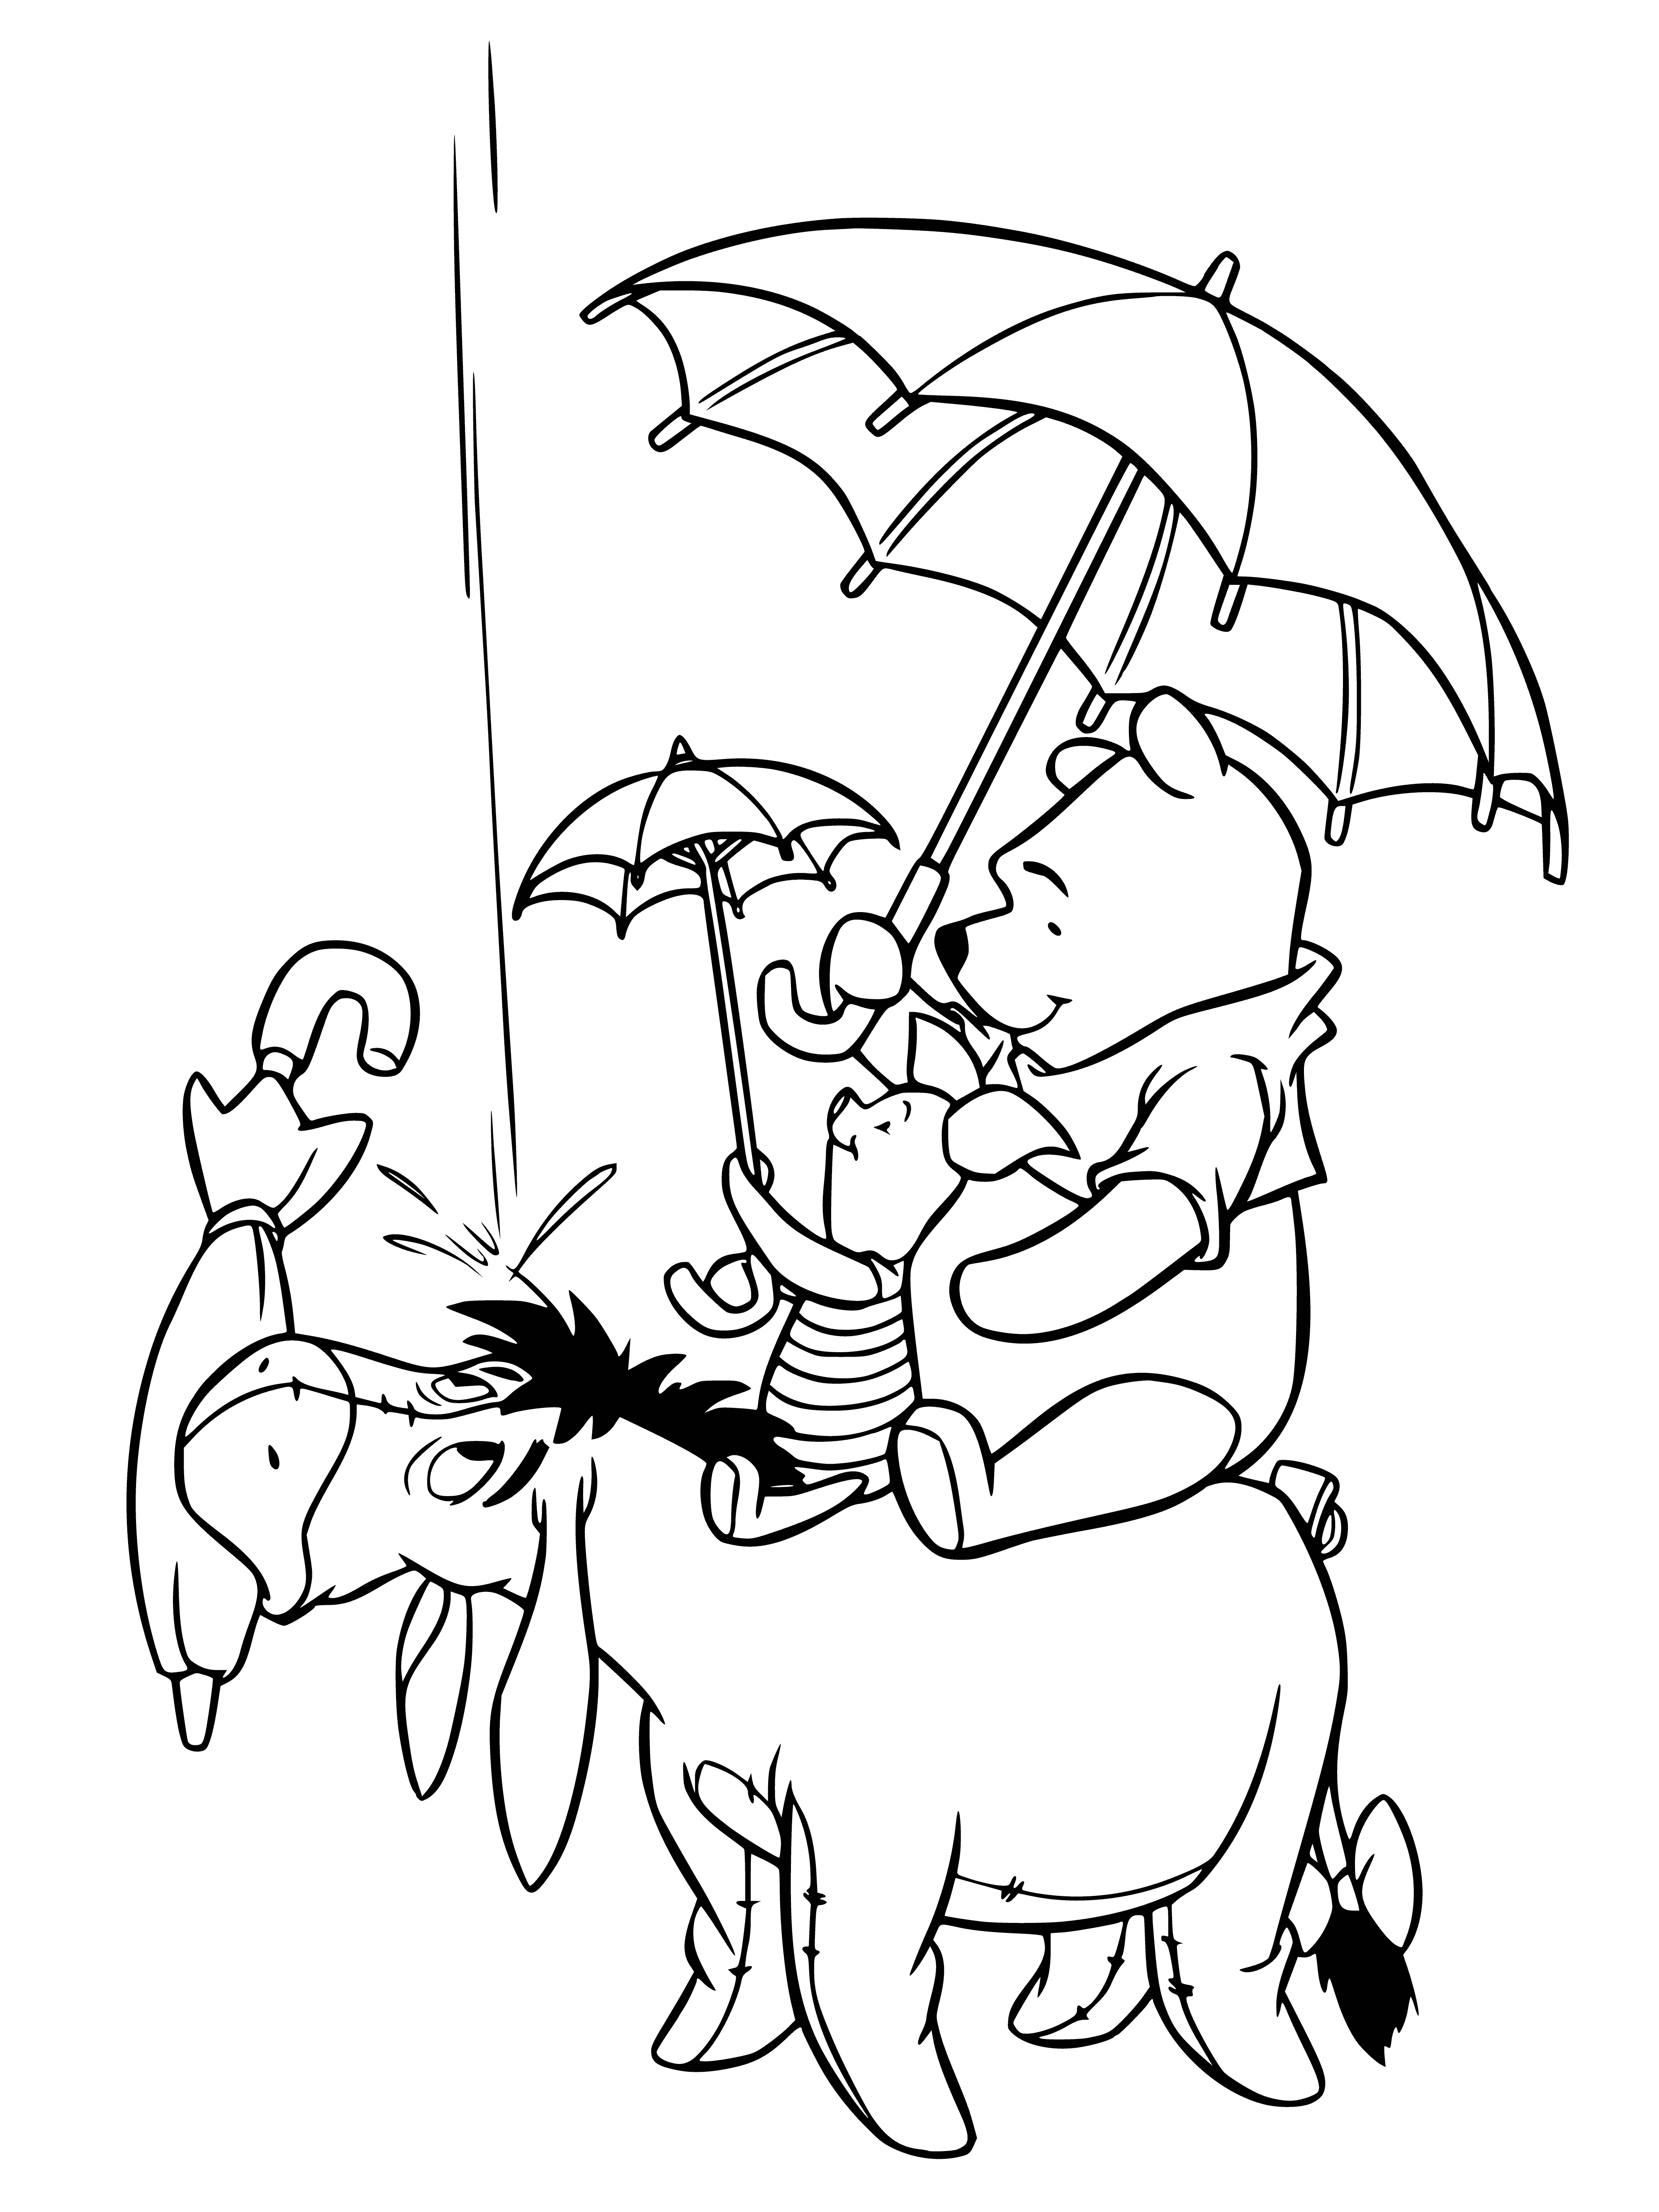 coloring page: In the rain, Pooh surprises himself with a honey pot while holding an umbrella.